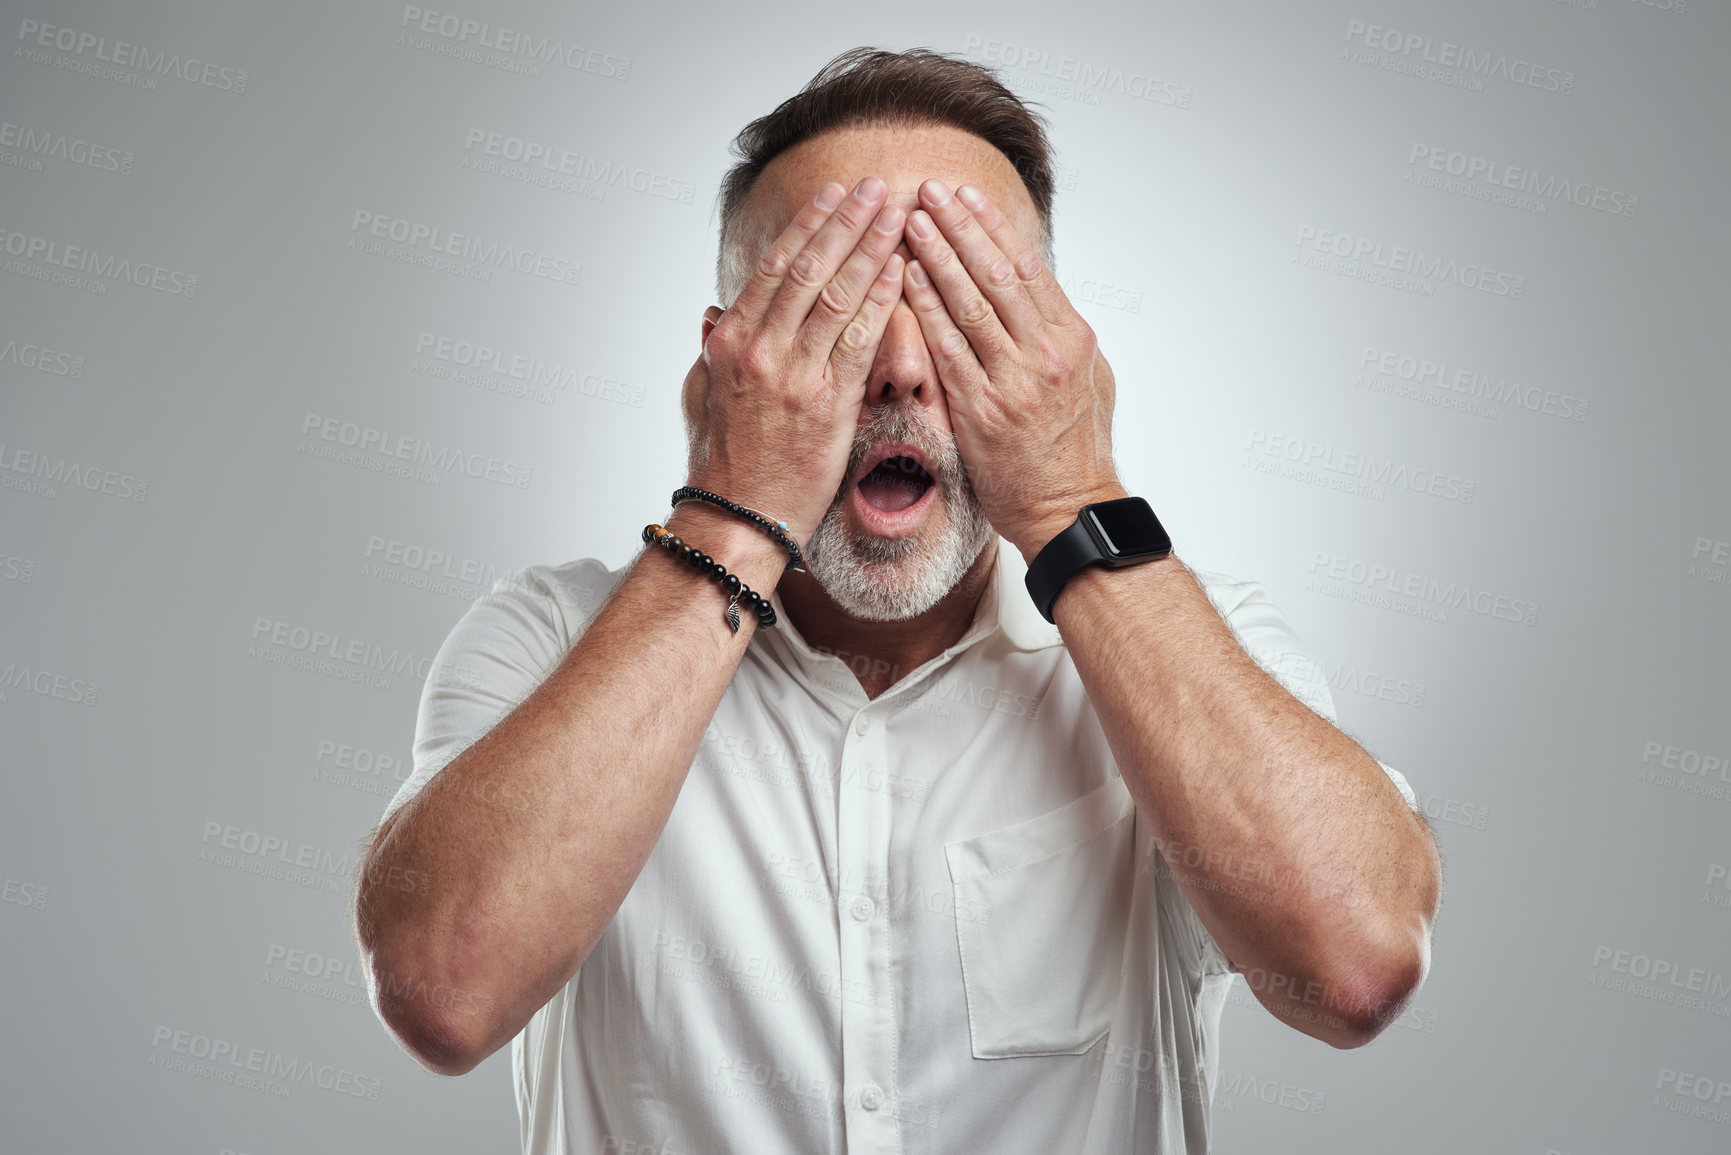 Buy stock photo Studio shot of a mature man covering his eyes and looking shocked against a grey background